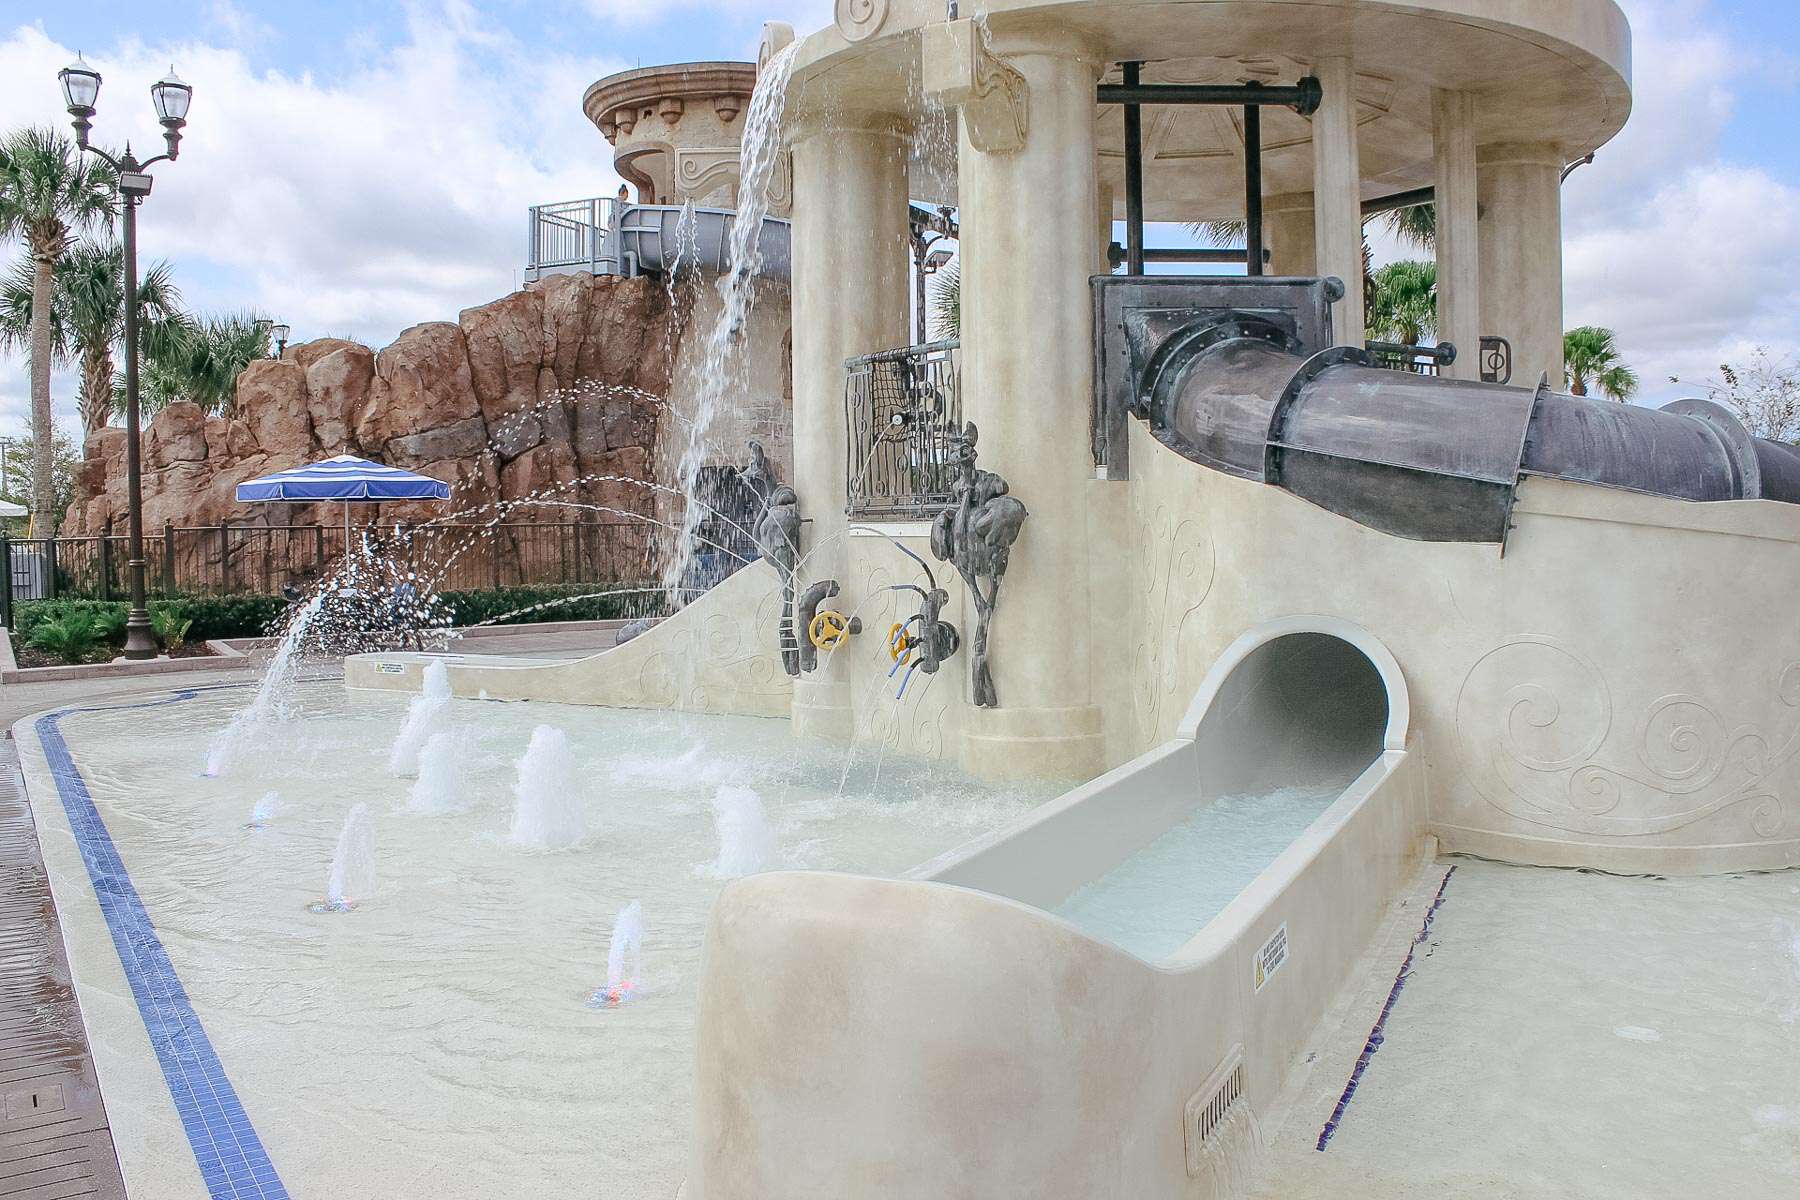 a miniature waterslide in the aquatic play area 